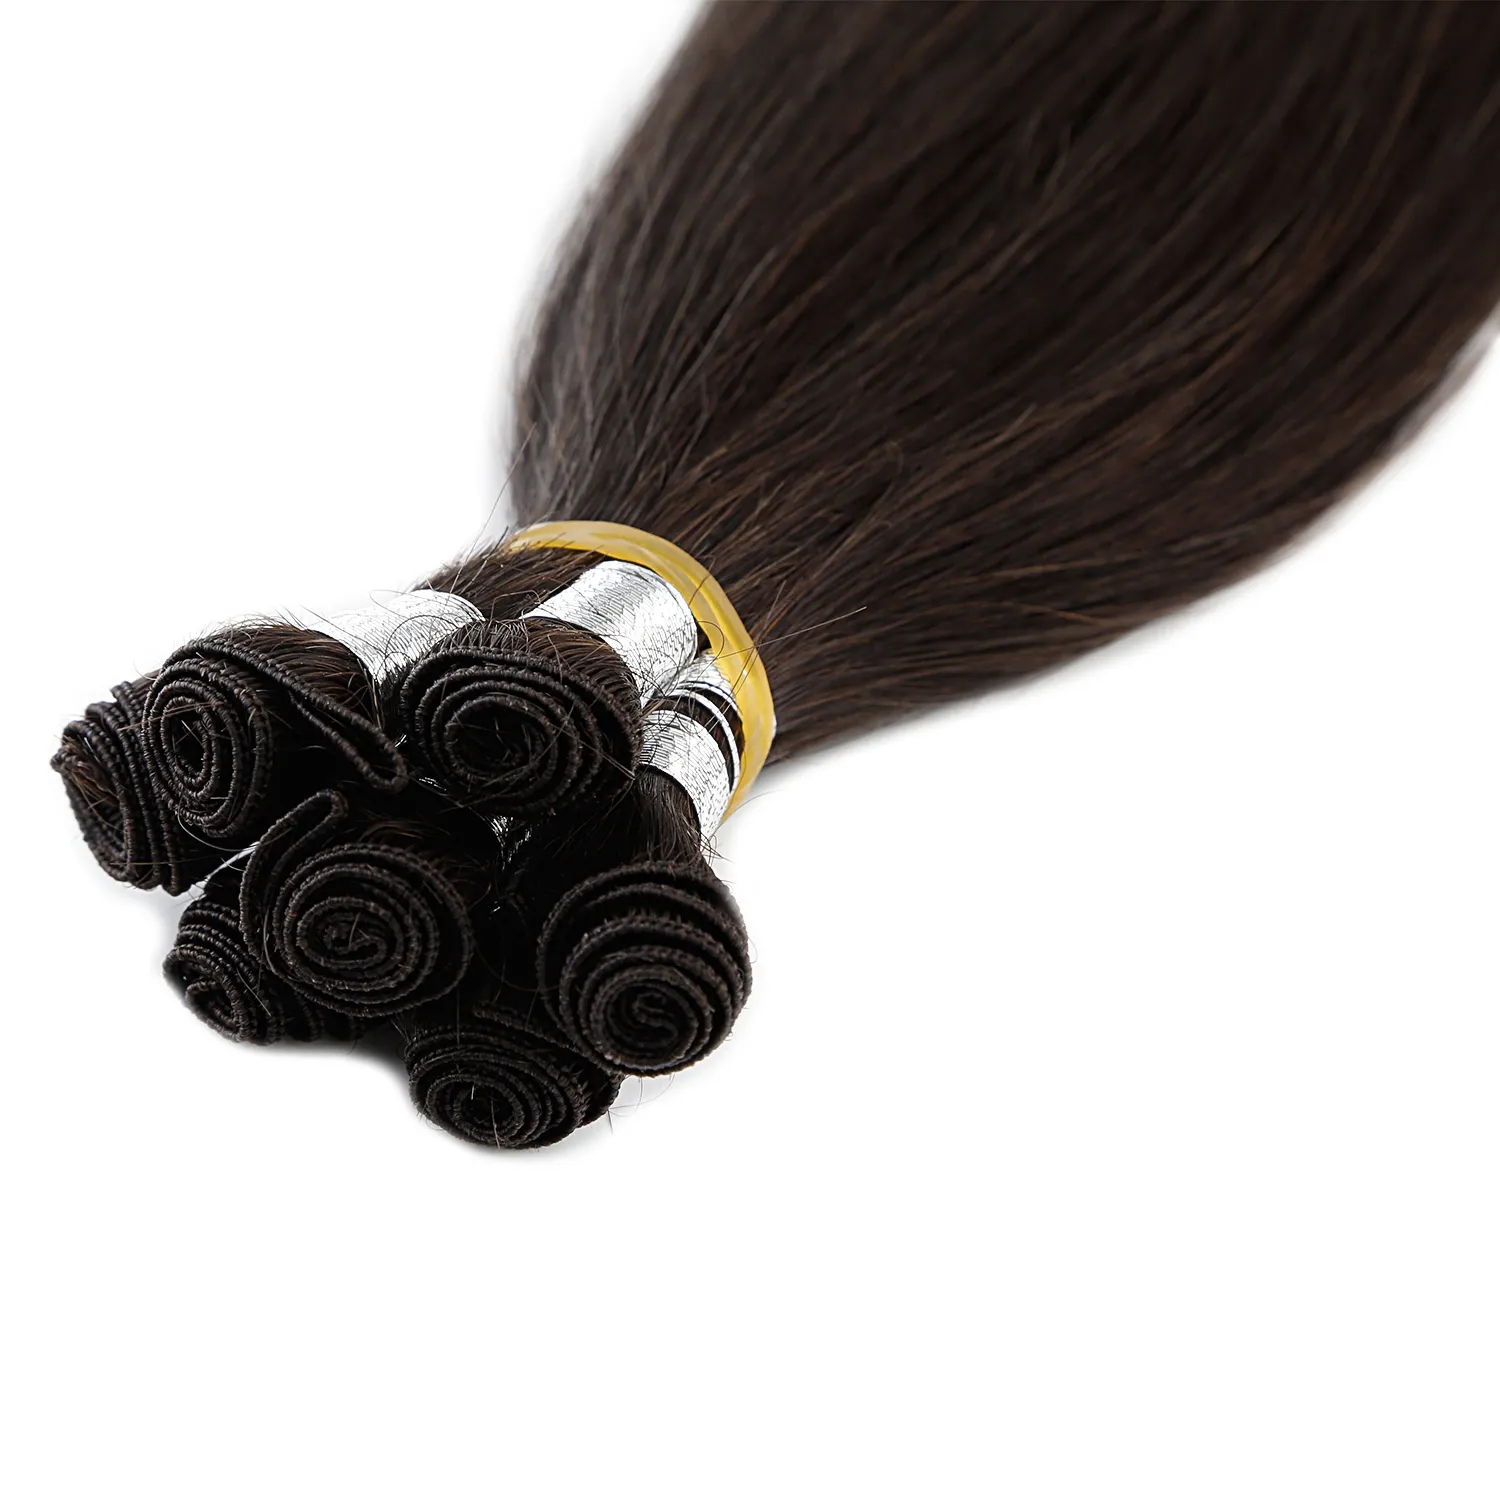 K.S WIGS New Handmade Remy Human Hair Hand Tied Weft Hair Extension Skin Weft Full Head Double Drawn Hand Tied Weft Hair Weaving